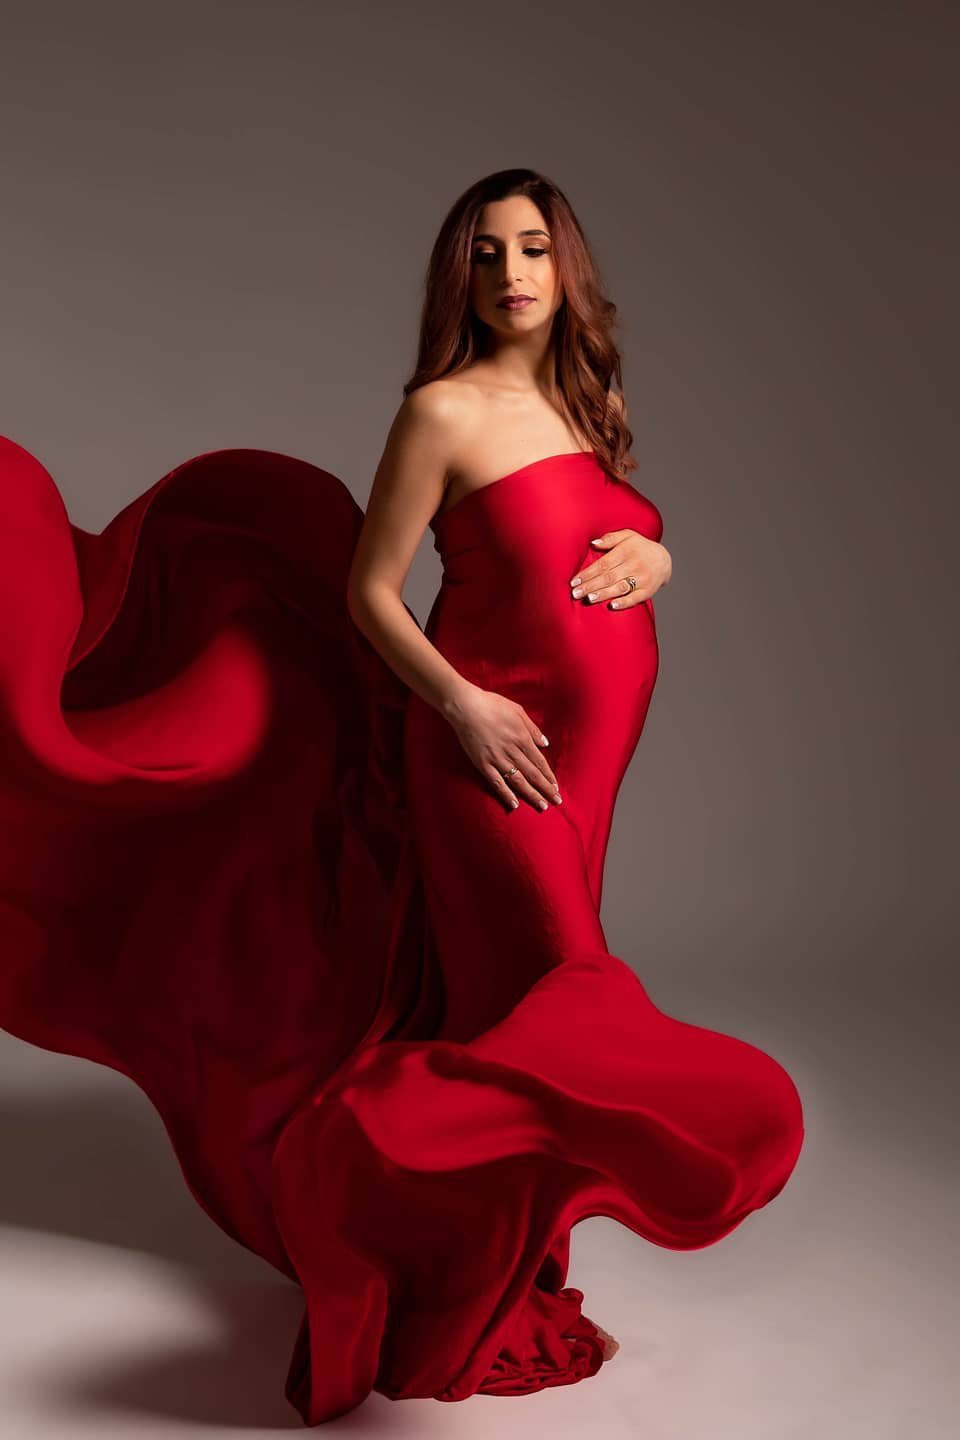 Red haired pregnant model poses with a scarf covering her body. The scarf is very long, made of silk in a vibrant red color.